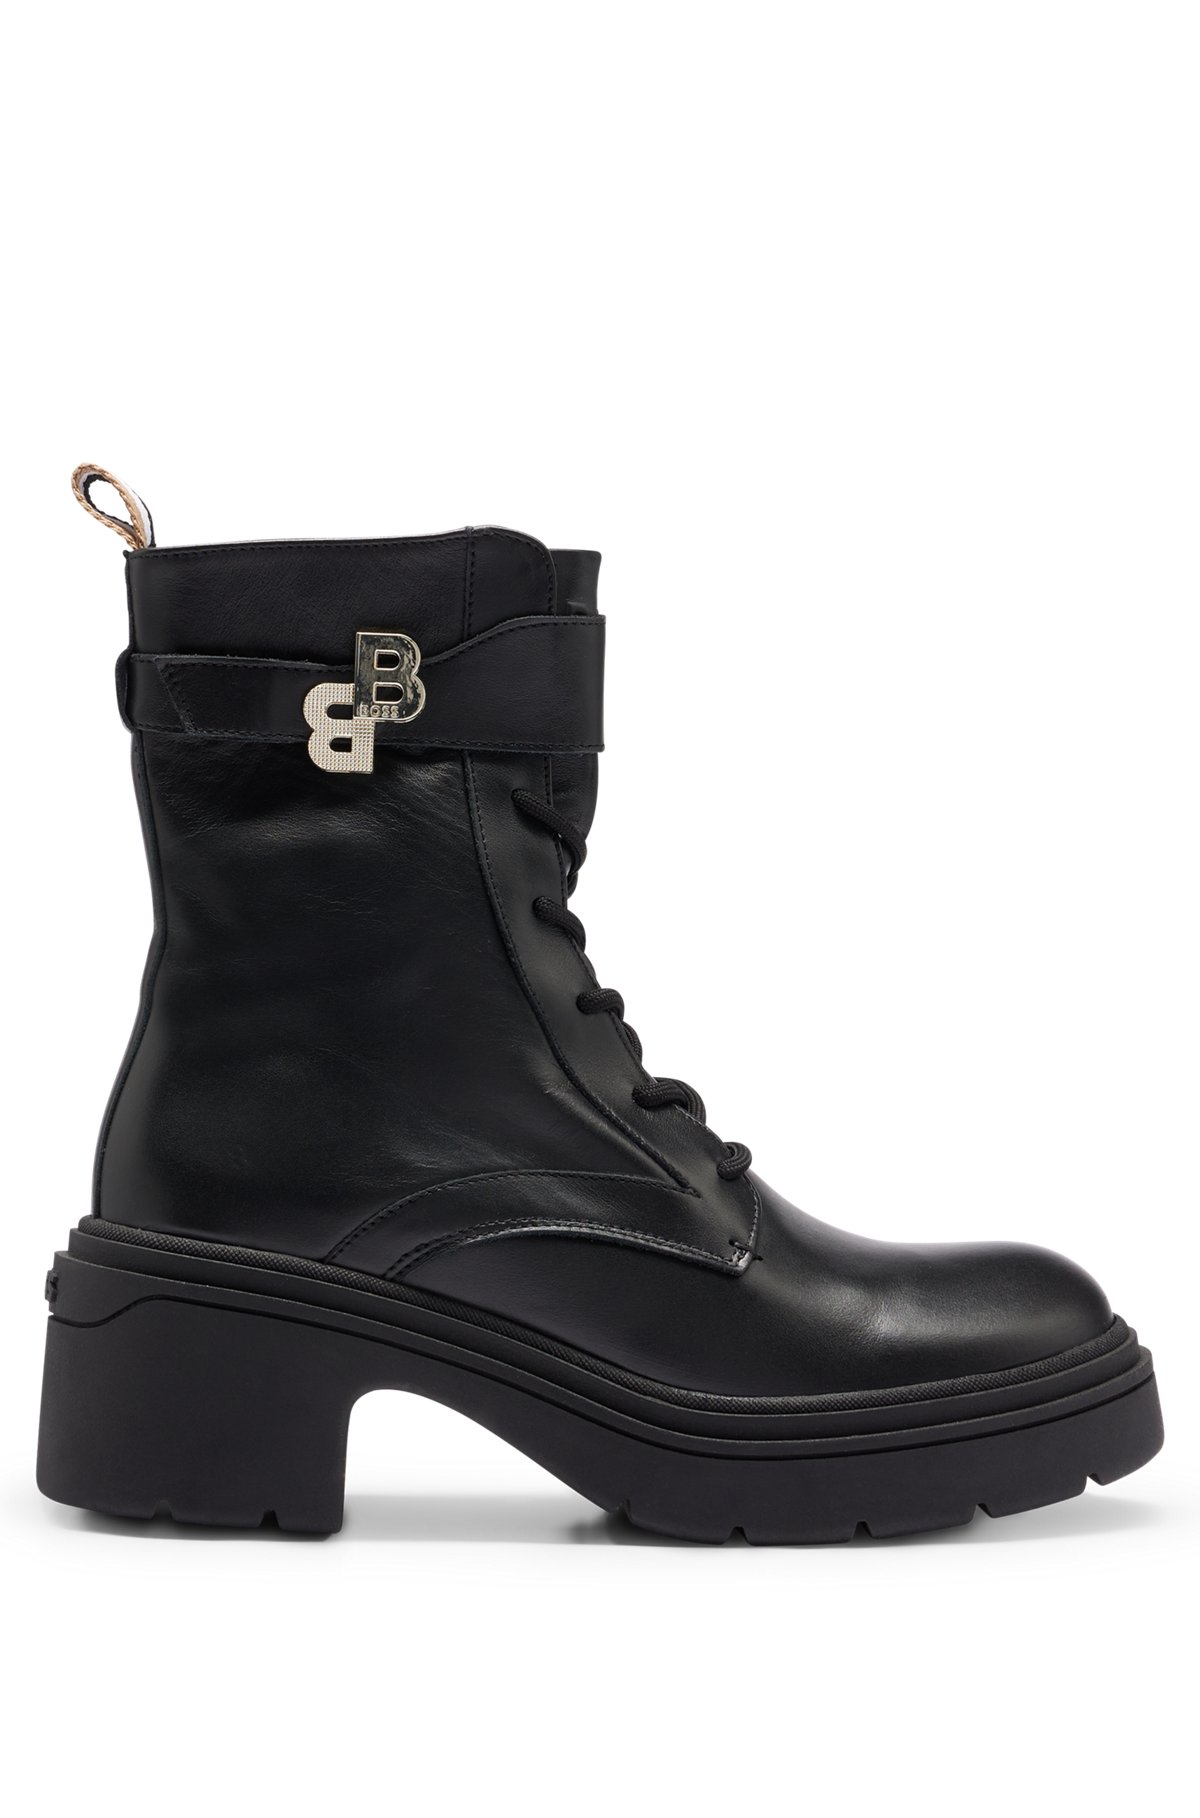 Leather boots with double-monogram detail, Black